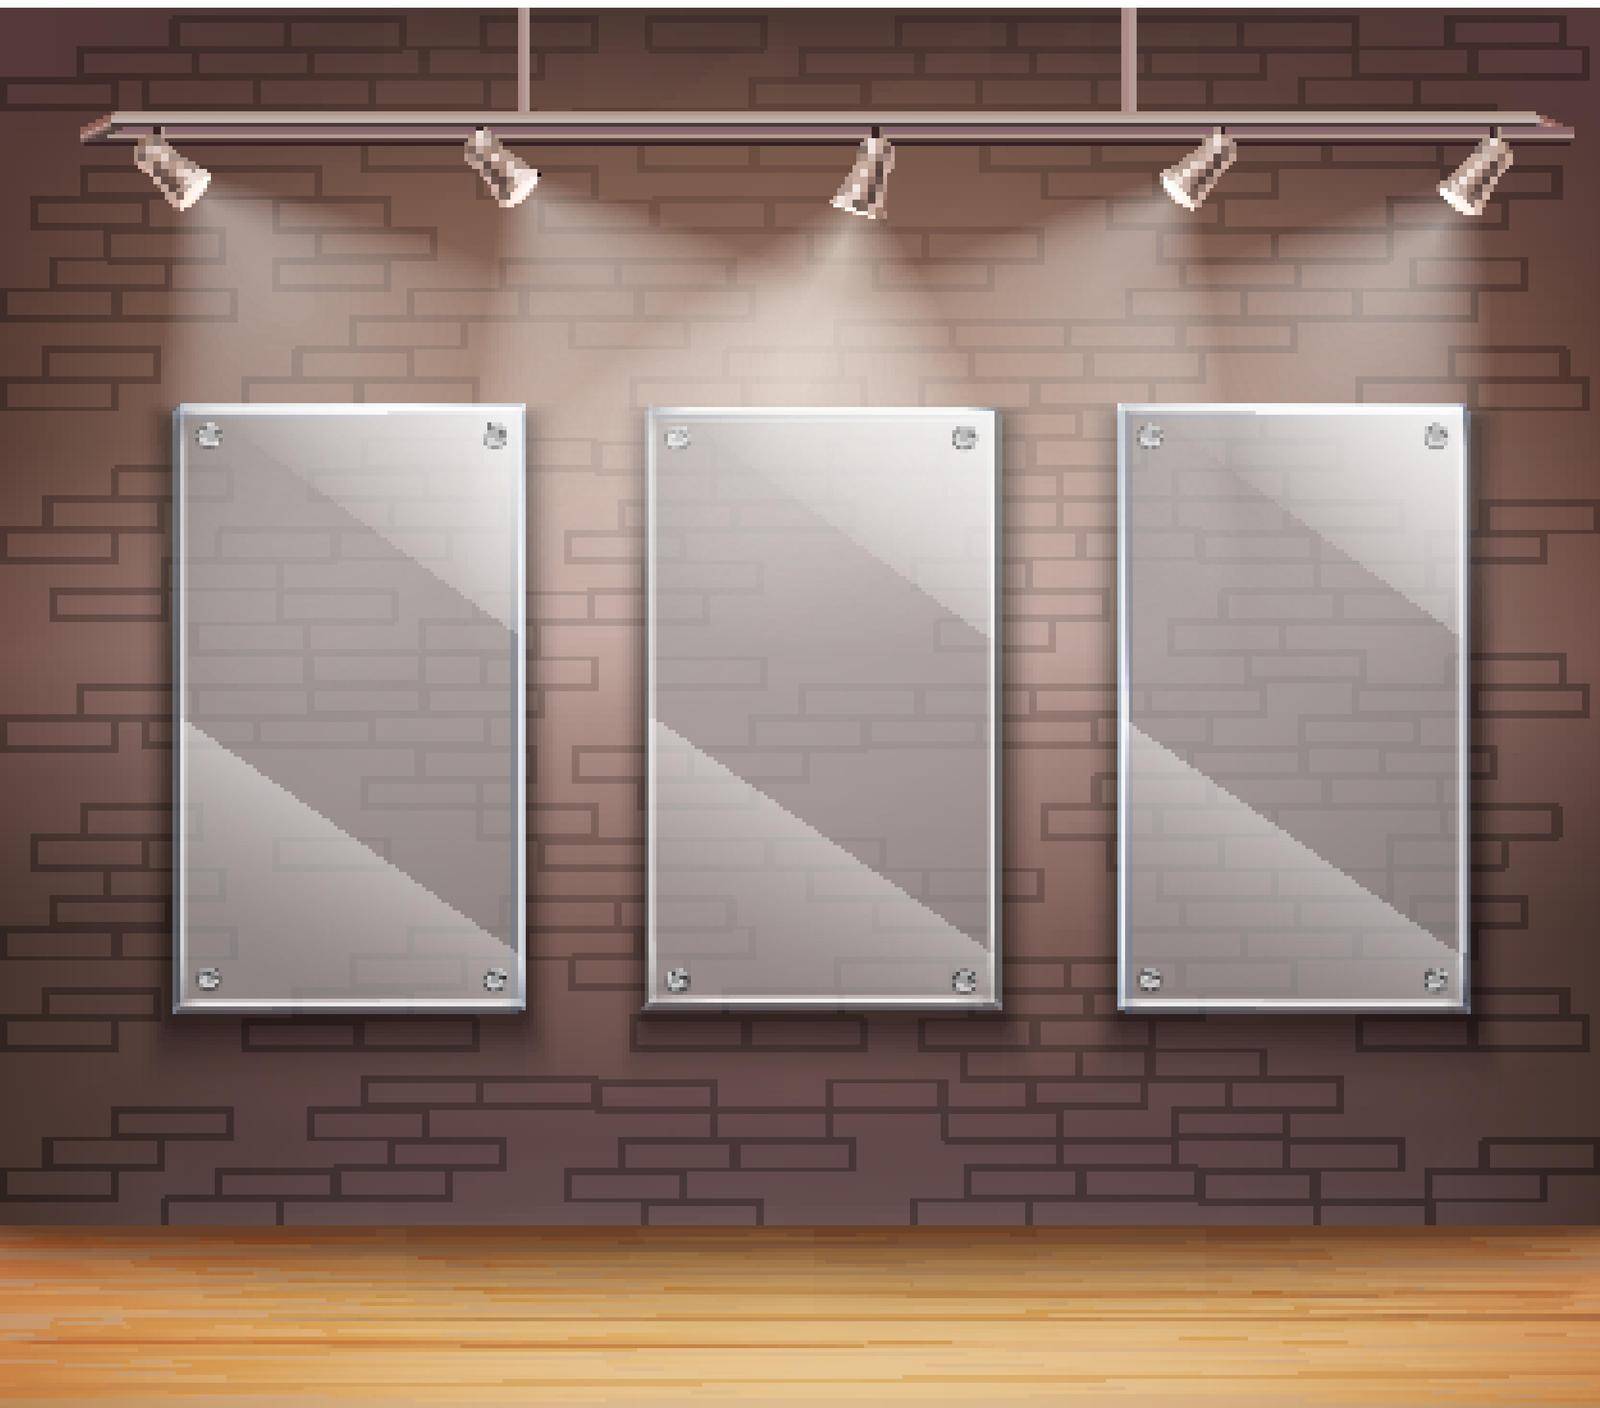 Gallery of 3 transparent glass frames on wall like background template for web design vector illustration